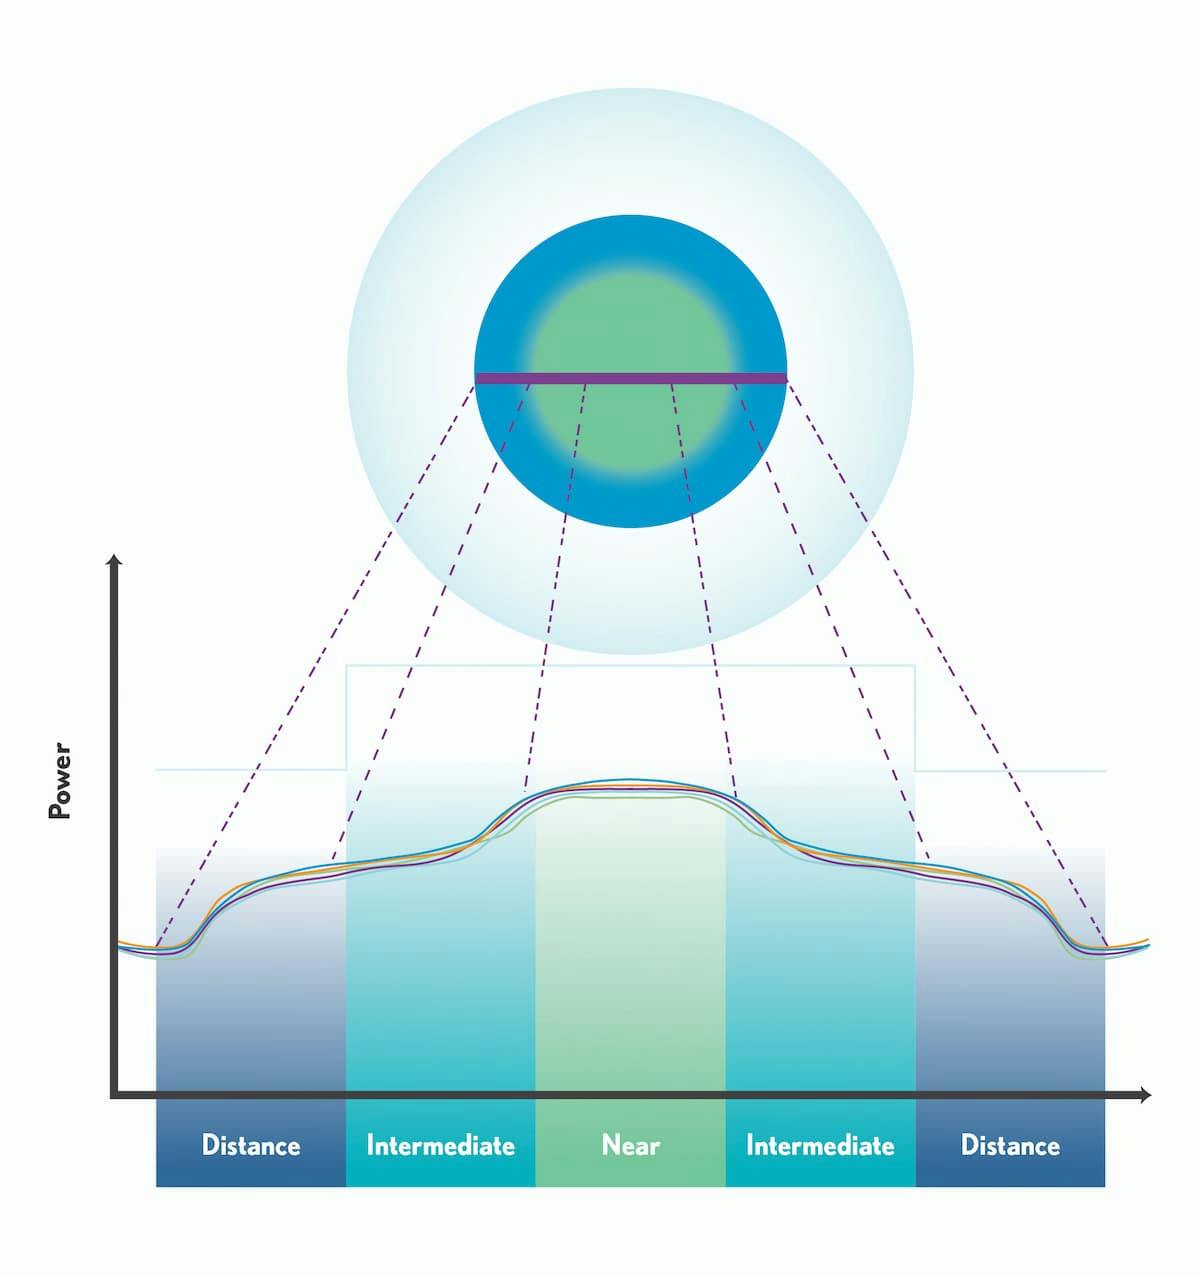 Figure 1. Representative power profile of a center-near multifocal contact lens. Because lenses generally have radial symmetry, one side of a power profile is sufficient to illustrate the change in power from the center to the periphery. Image credit: David P. Piñero, PhD